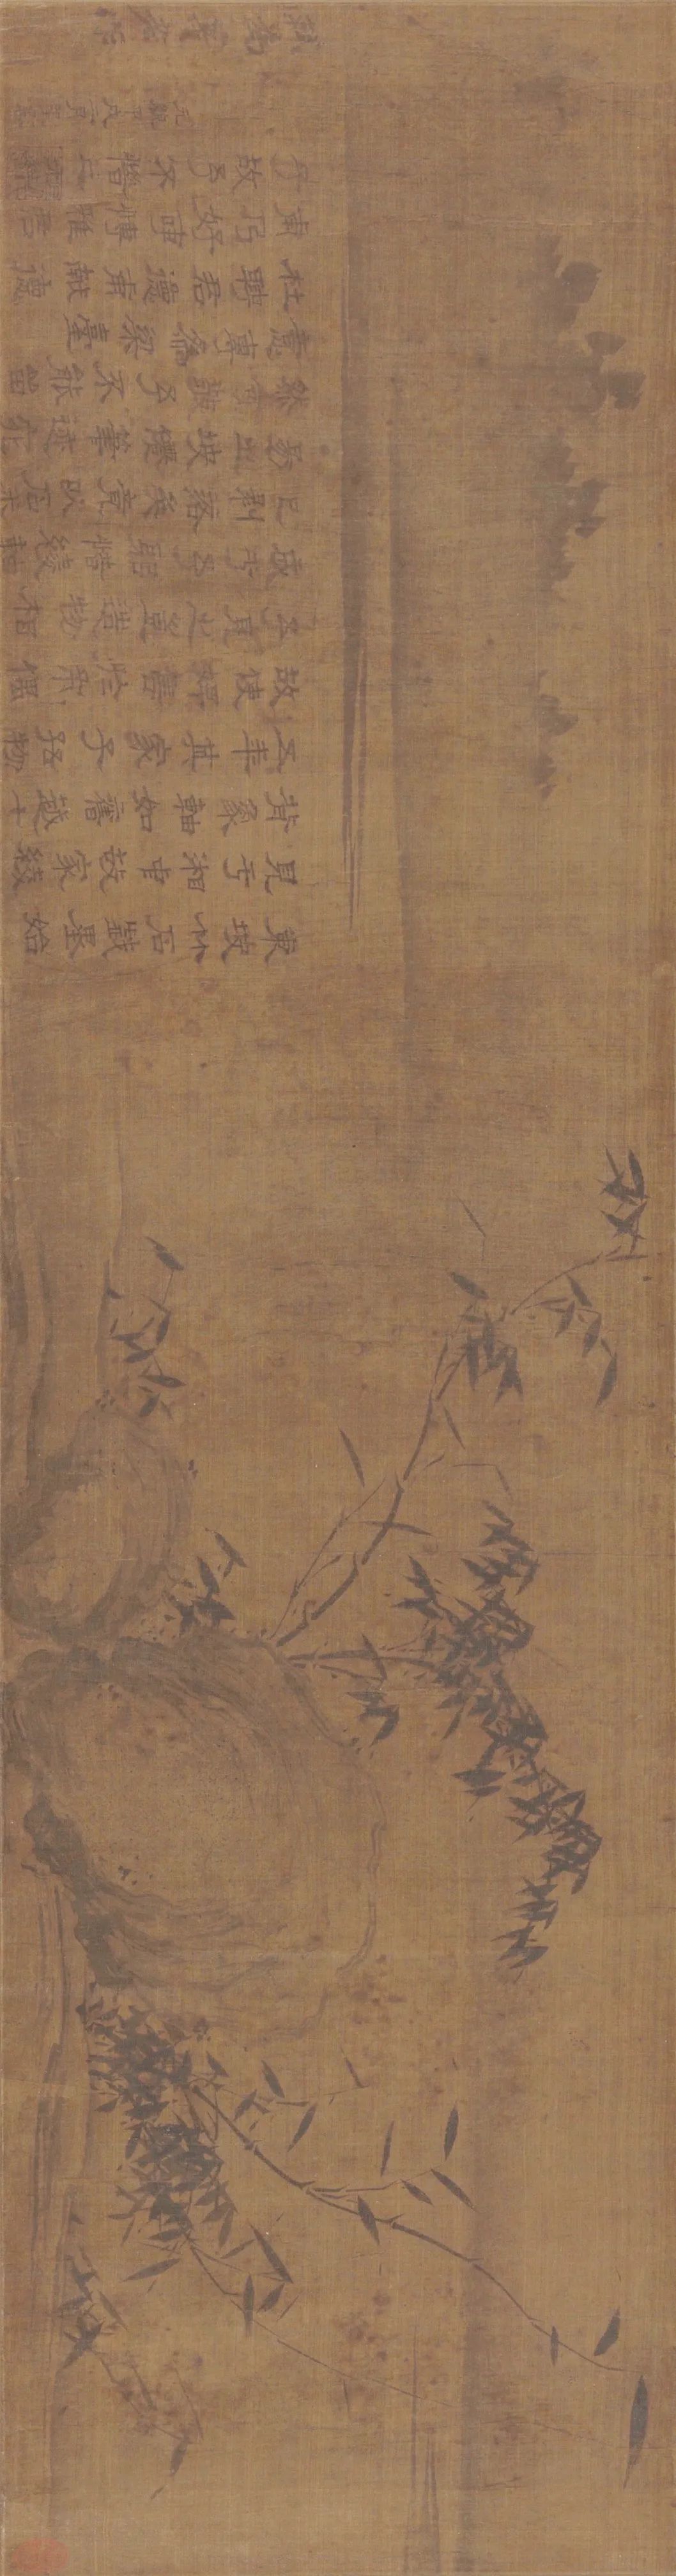 "Xiaoxiang Bamboo and Stone" Song Su Shi (biography) Collection of National Art Museum of China